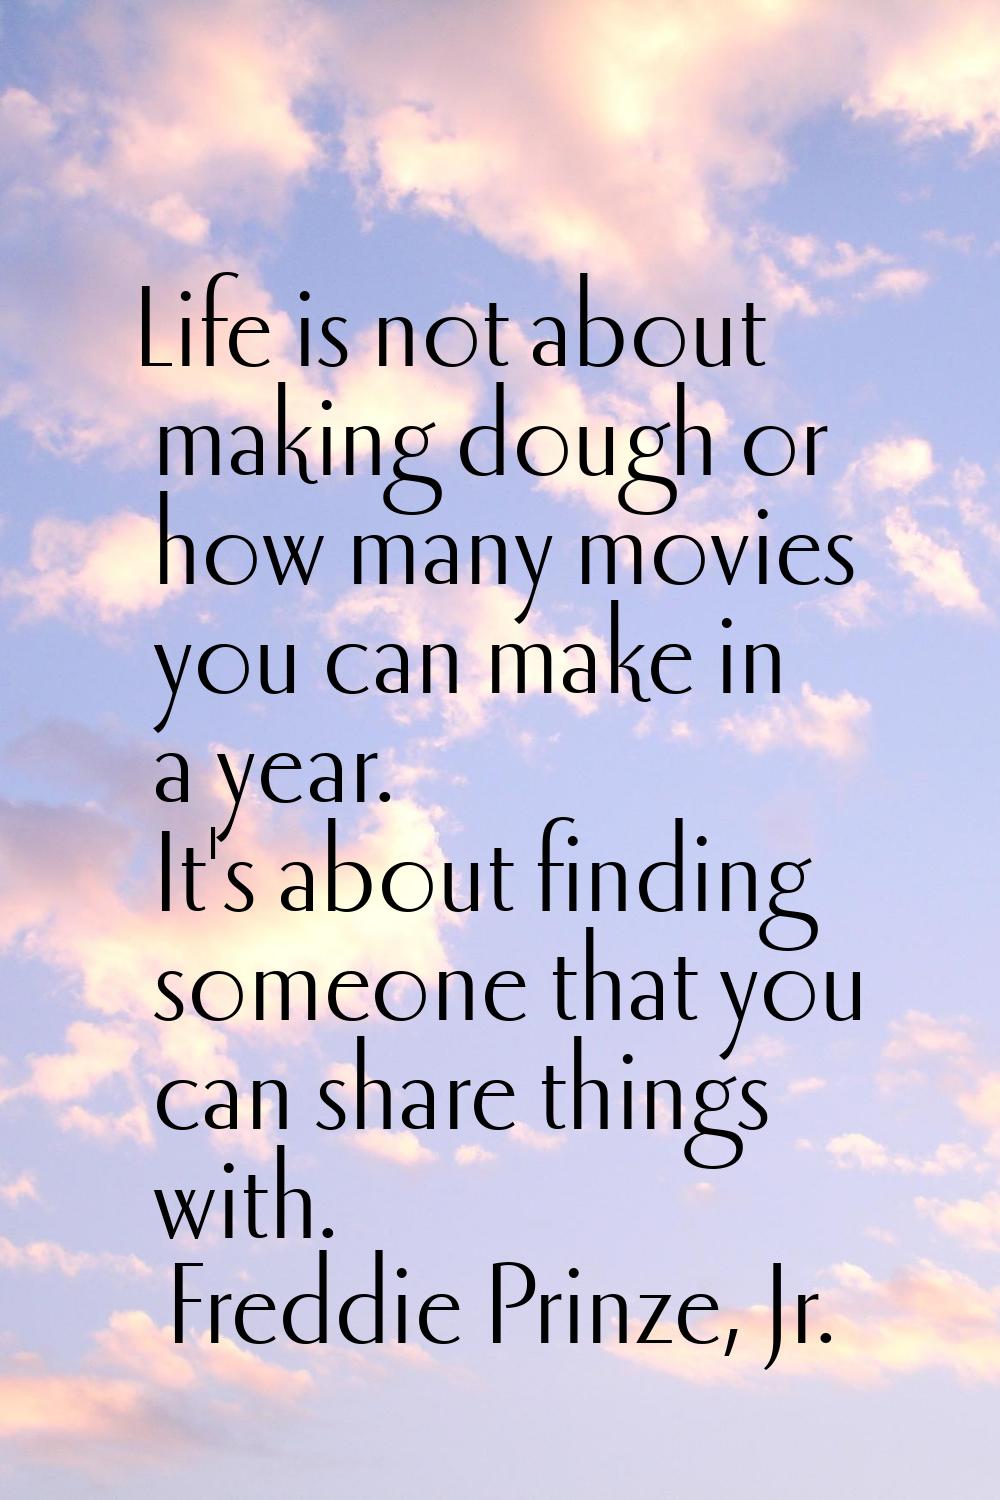 Life is not about making dough or how many movies you can make in a year. It's about finding someon